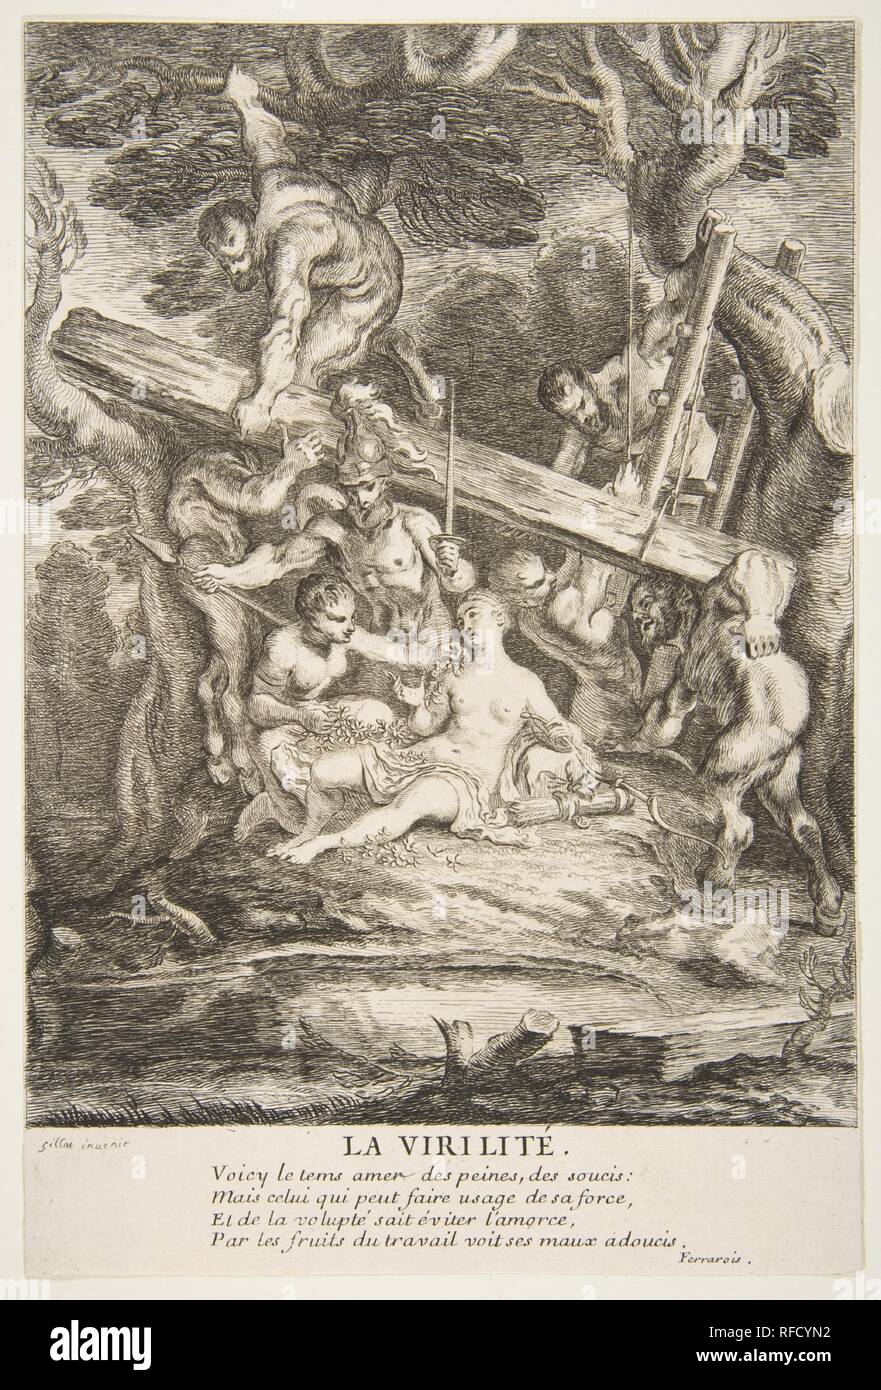 Manhood. Artist: Claude Gillot (French, Langres 1673-1722 Paris); Engraved by François Joullain (French, Paris 1697-1778 Paris). Dimensions: image: 9 7/16 x 6 3/16 in. (23.9 x 15.7 cm), trimmed to image. Date: n.d.. Museum: Metropolitan Museum of Art, New York, USA. Stock Photo